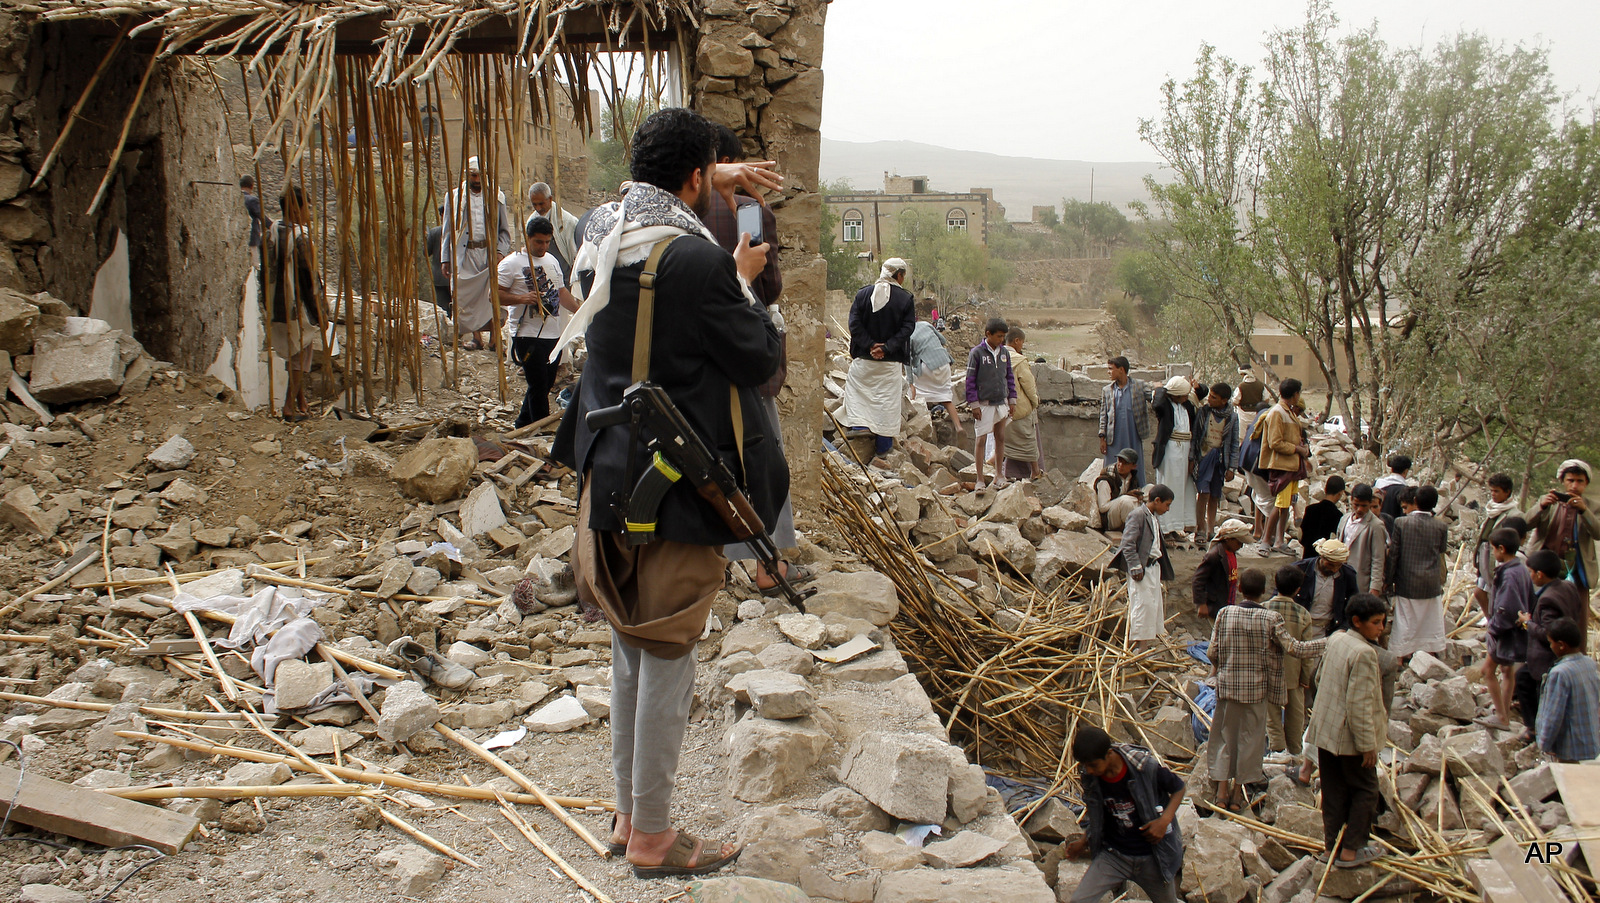 A Yemeni man uses his mobile to take photos of the rubble of houses destroyed by Saudi airstrikes in a village near Sanaa, Yemen, Saturday, April 4, 2015.